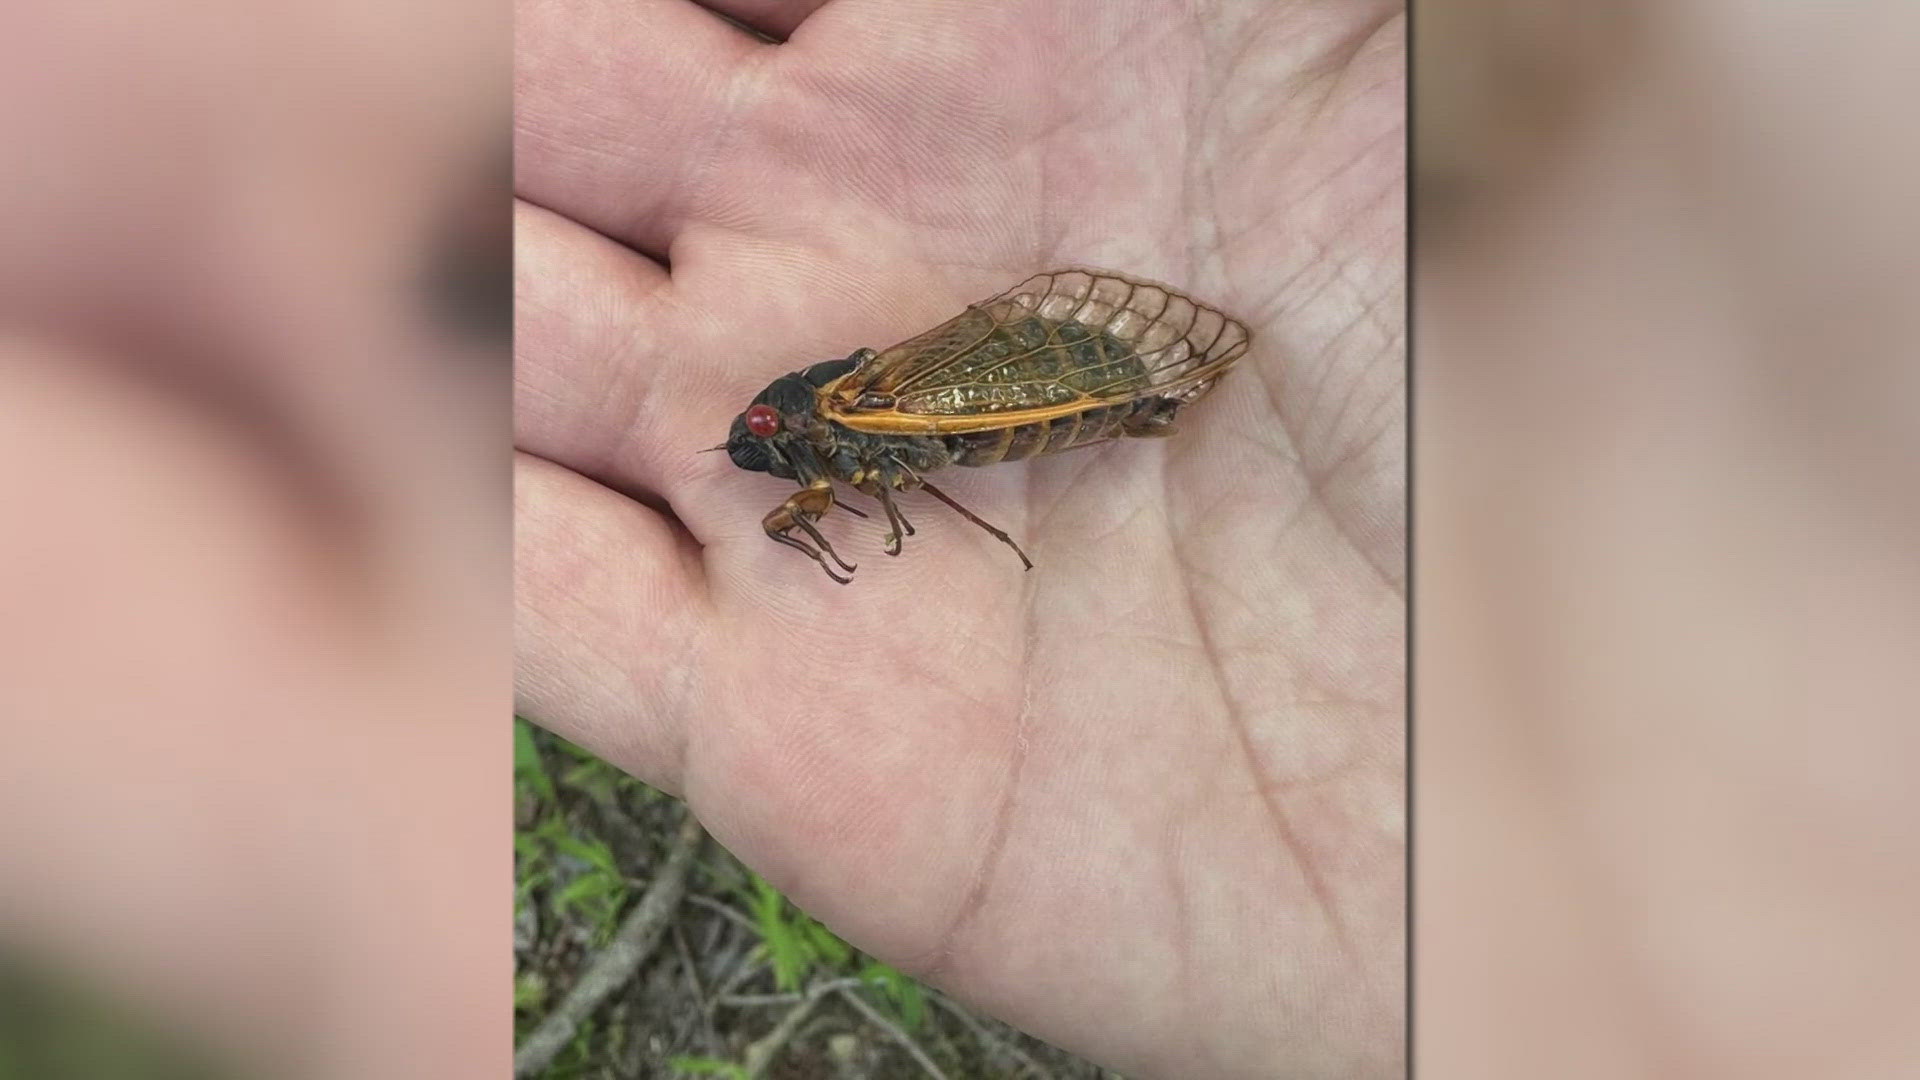 Chad Silber explains how his adventure to find cicadas evolved into a surprising realization.